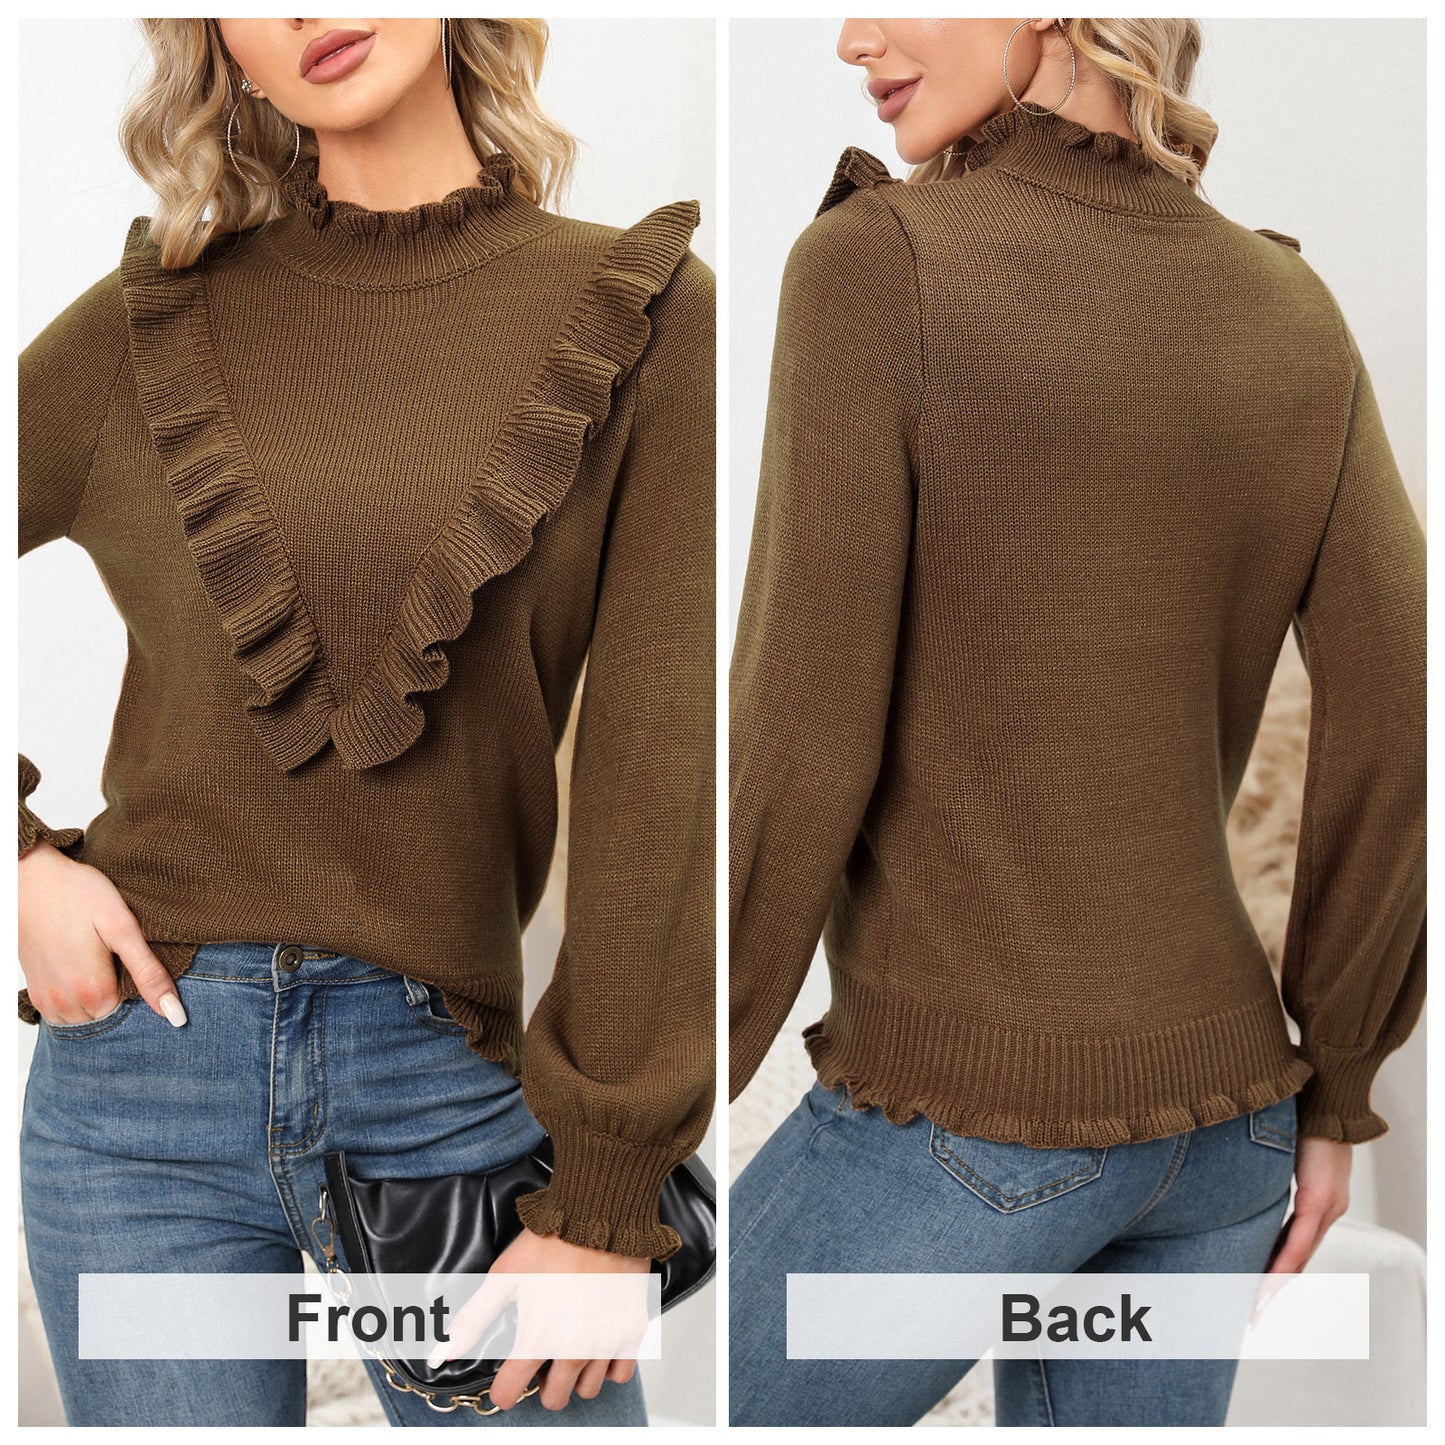 EXLURA Women's Ruffle Chunky Pullover Sweater Mock Turtleneck Long Puff Sleeve Jumpers Casual Trendy Tops